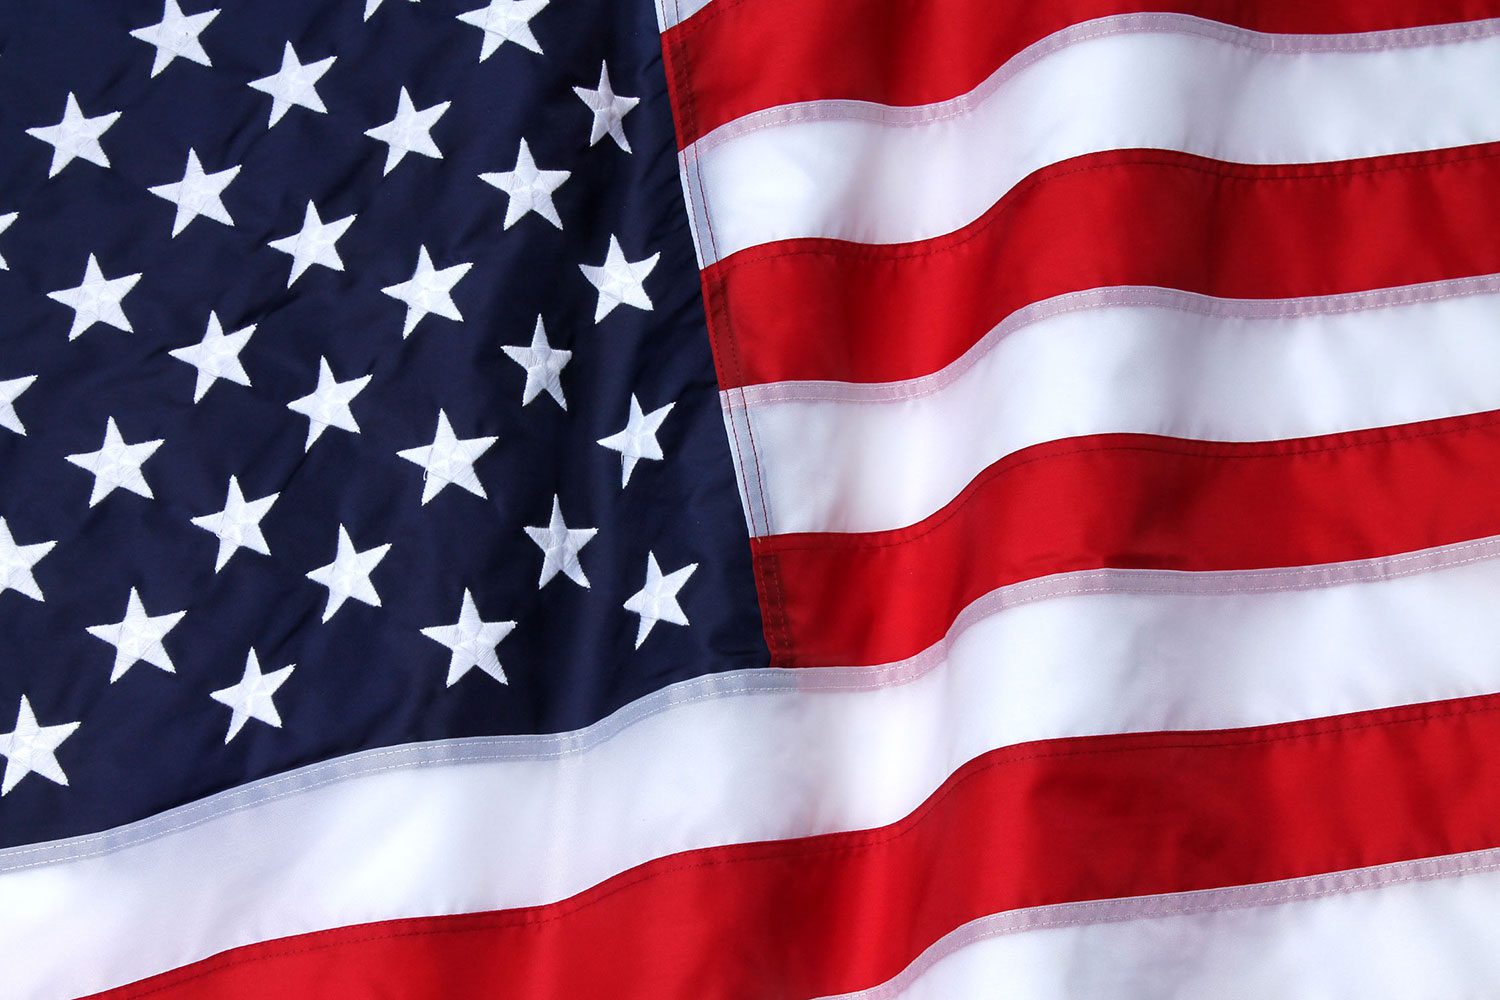 Close-up of the united states flag with stars and stripes.